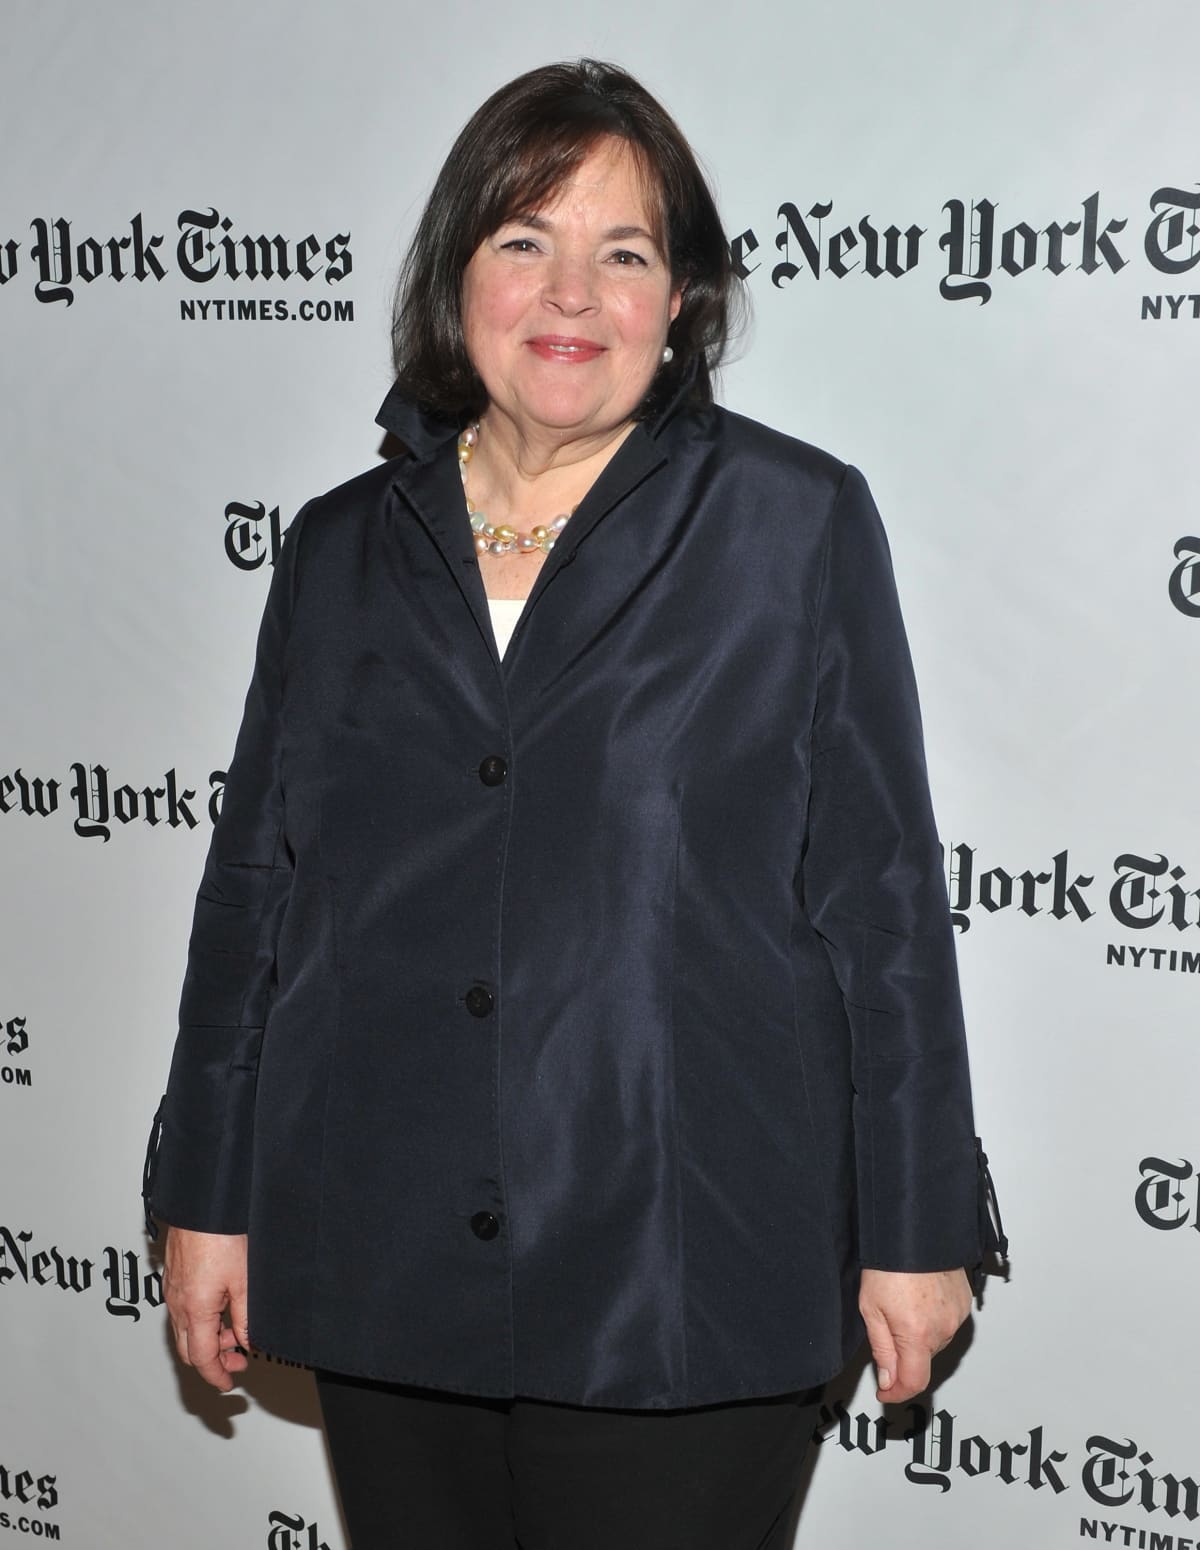 NEW YORK, NY - JANUARY 08:  TV personality Ina Garten attends the 10th Annual New York Times Arts & Leisure Weekend photocall at the Times Center on January 8, 2011 in New York City.  (Photo by Stephen Lovekin/Getty Images)